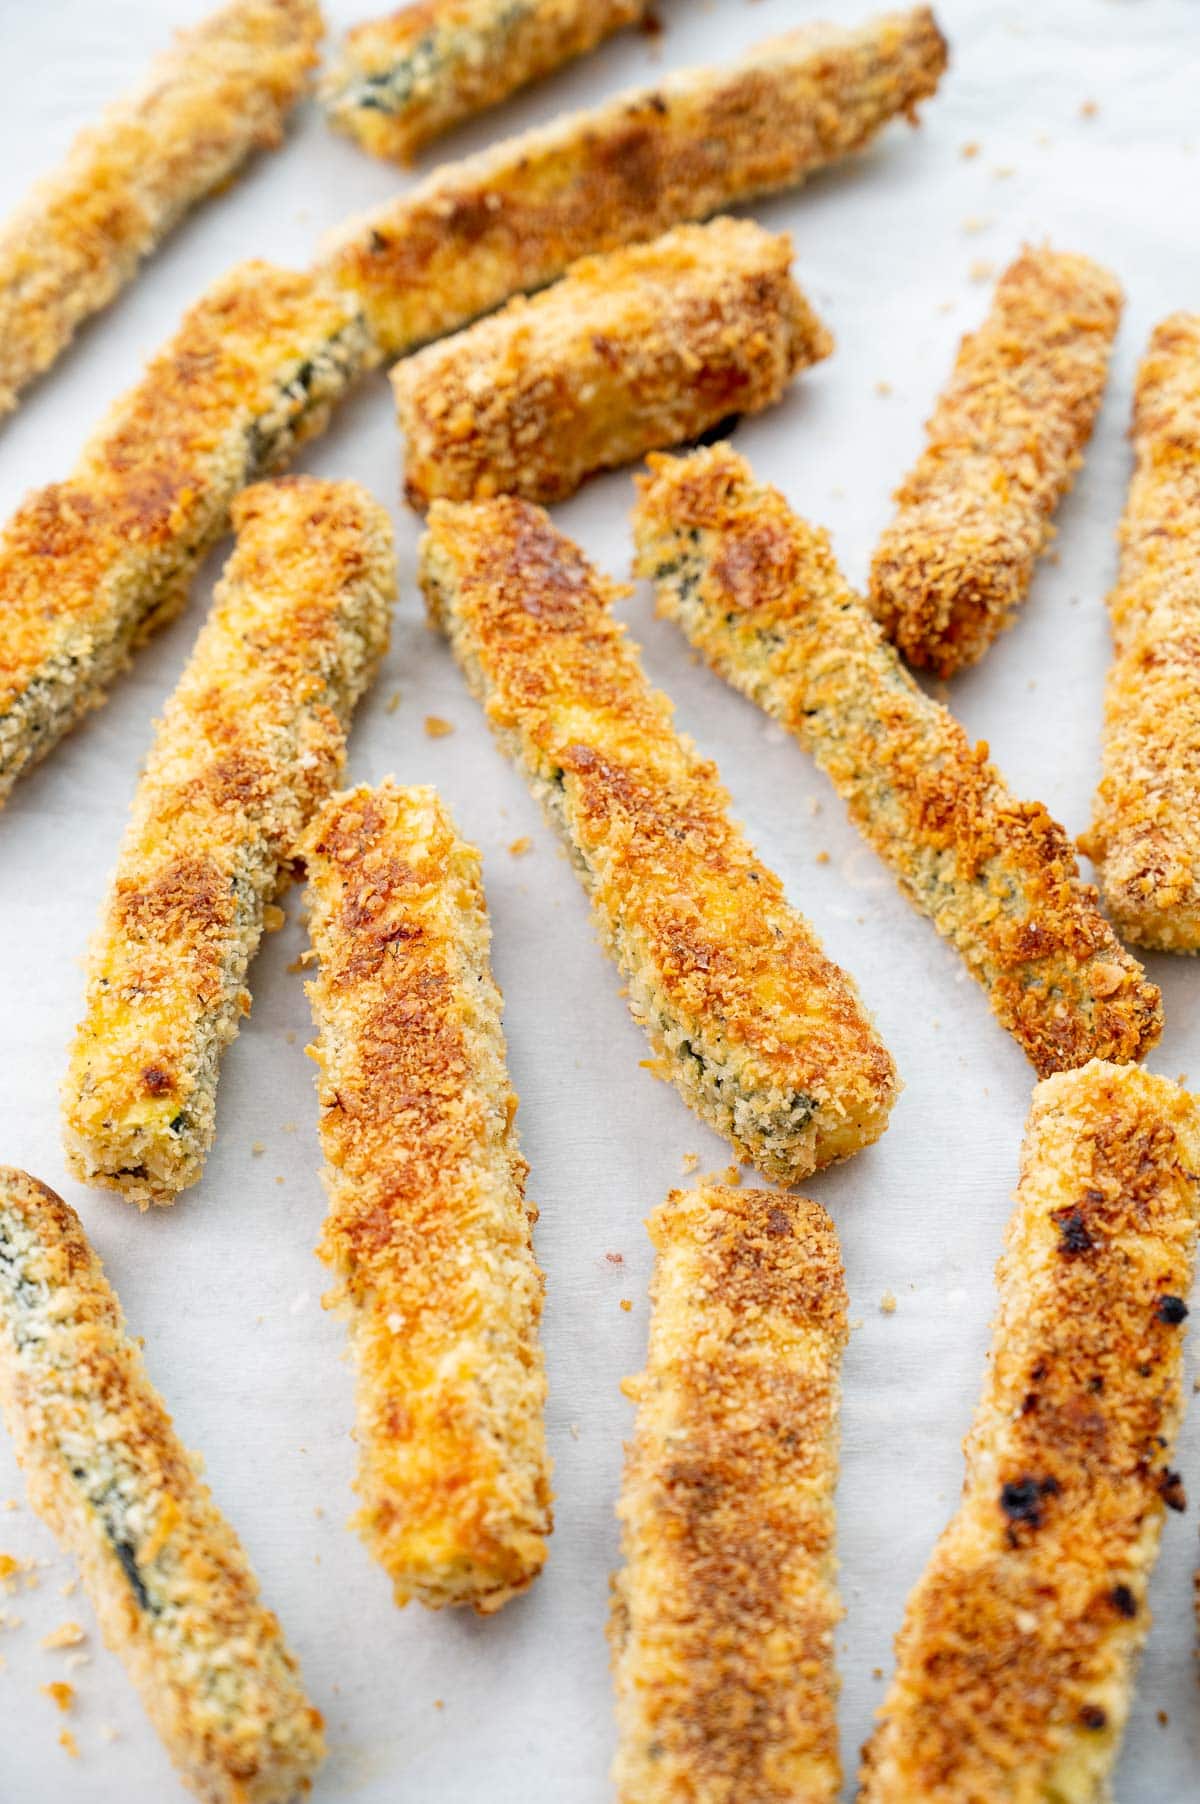 Zucchini fries on a piece of parchment paper.